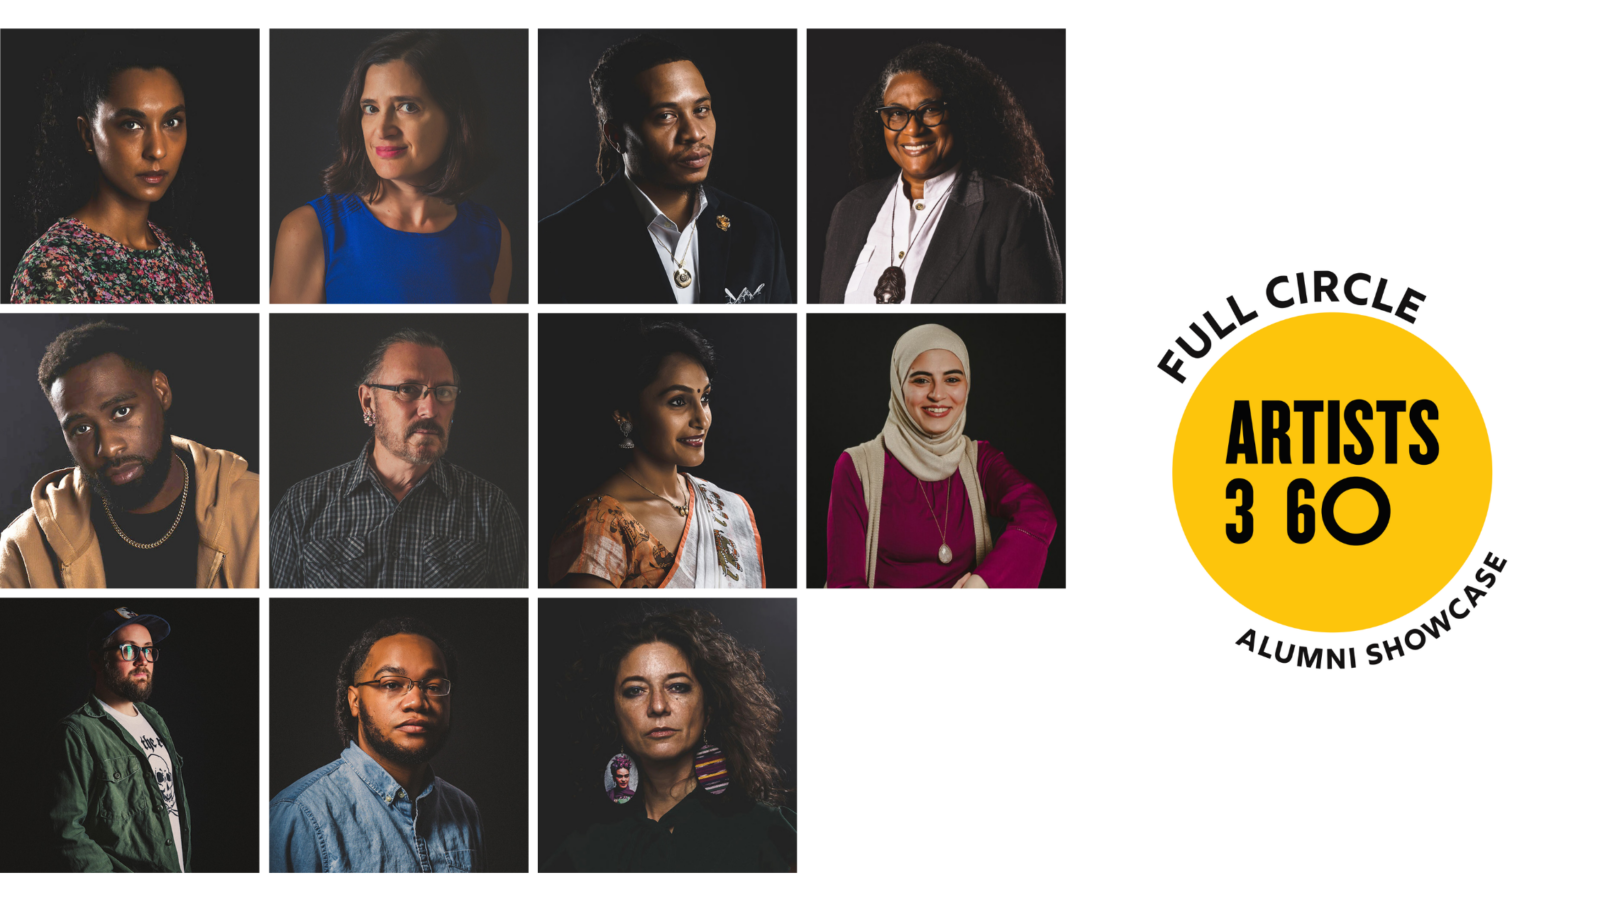 A grid of headshot images featuring the presenting artists for the Full Circle Showcase, yellow circle logo depicted on the right.